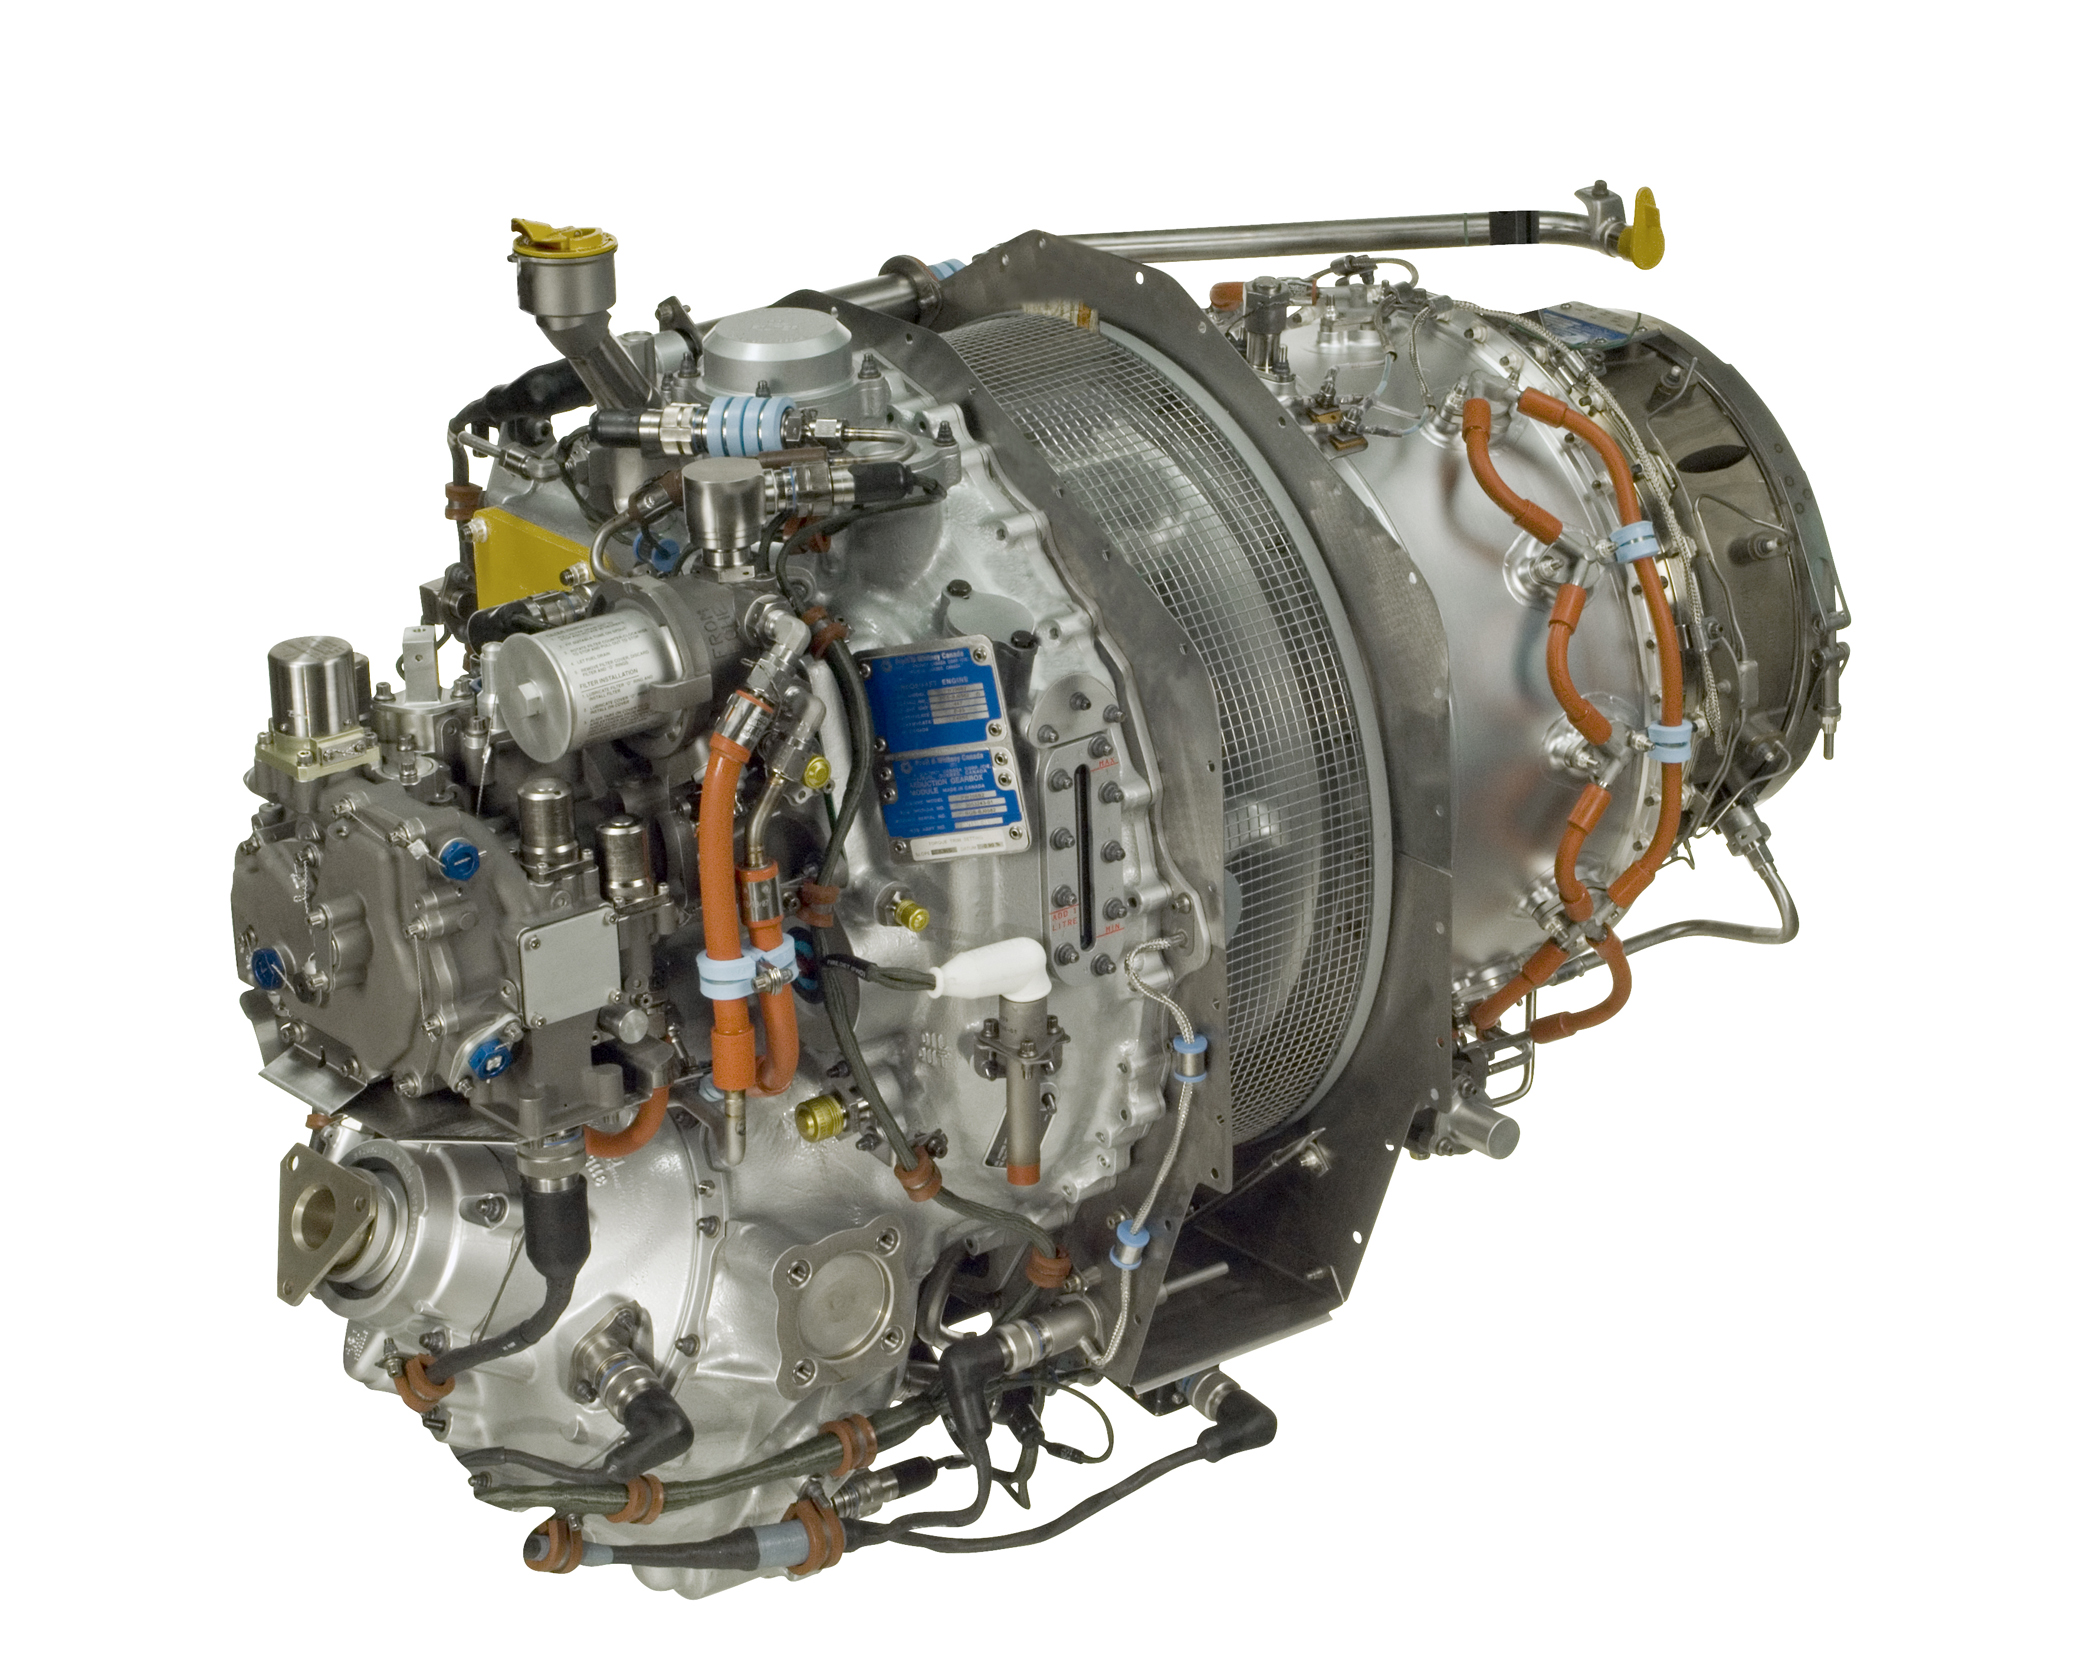 Government of Spain selects Pratt & Whitney Canada PW206B3s to power 36 Airbus H135s